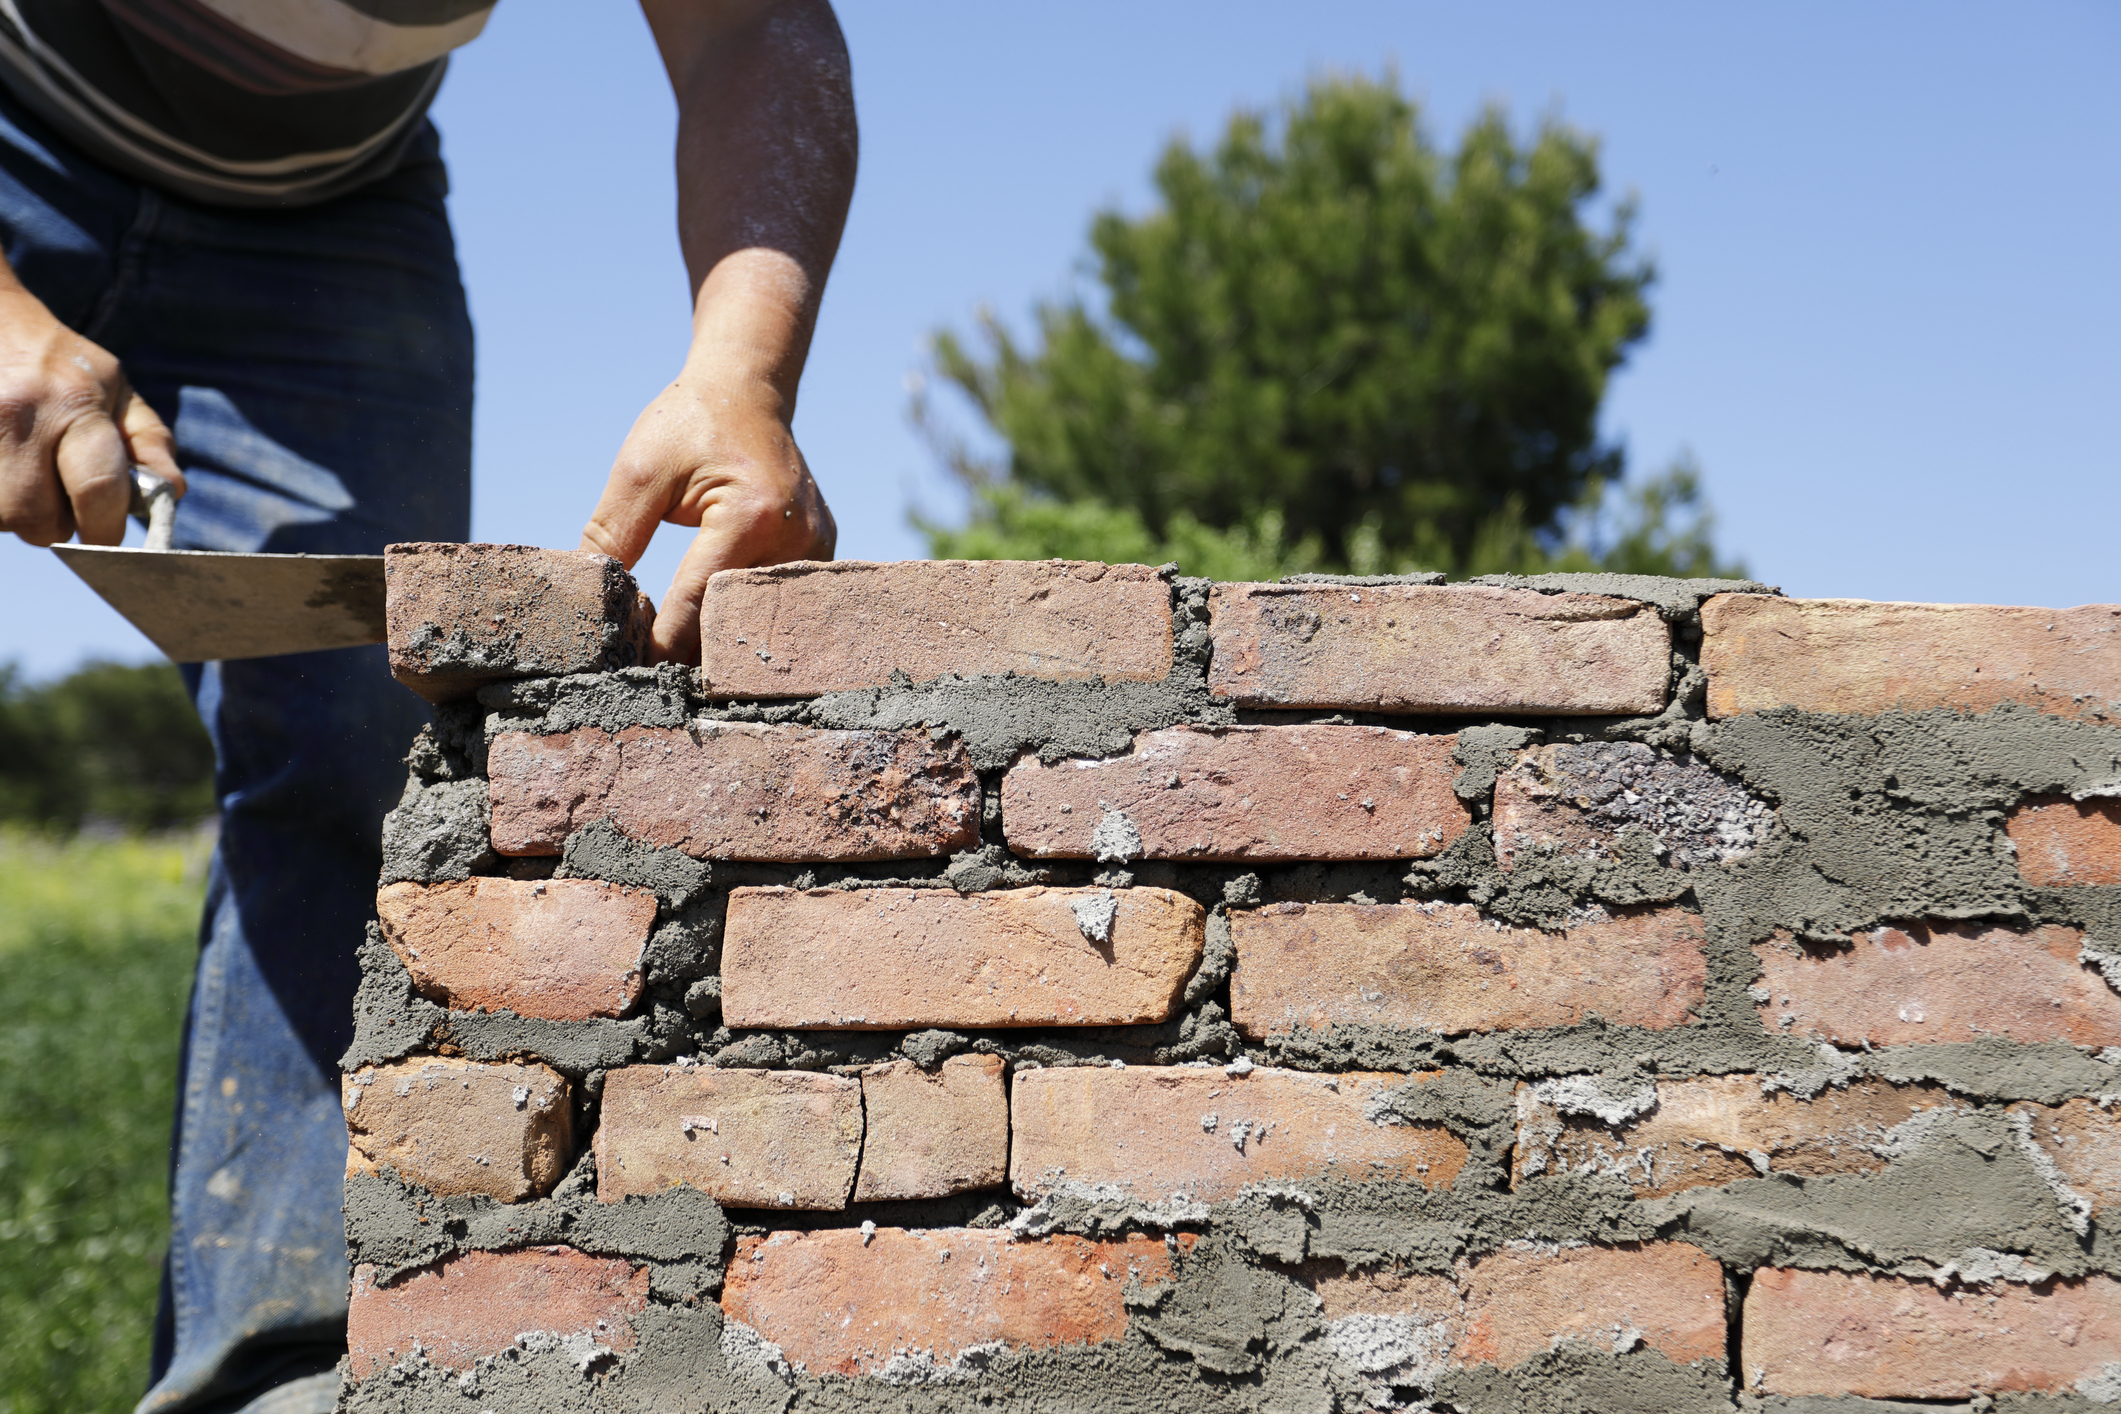 A man building a red, brick wall against backdrop of blue sky and tree.